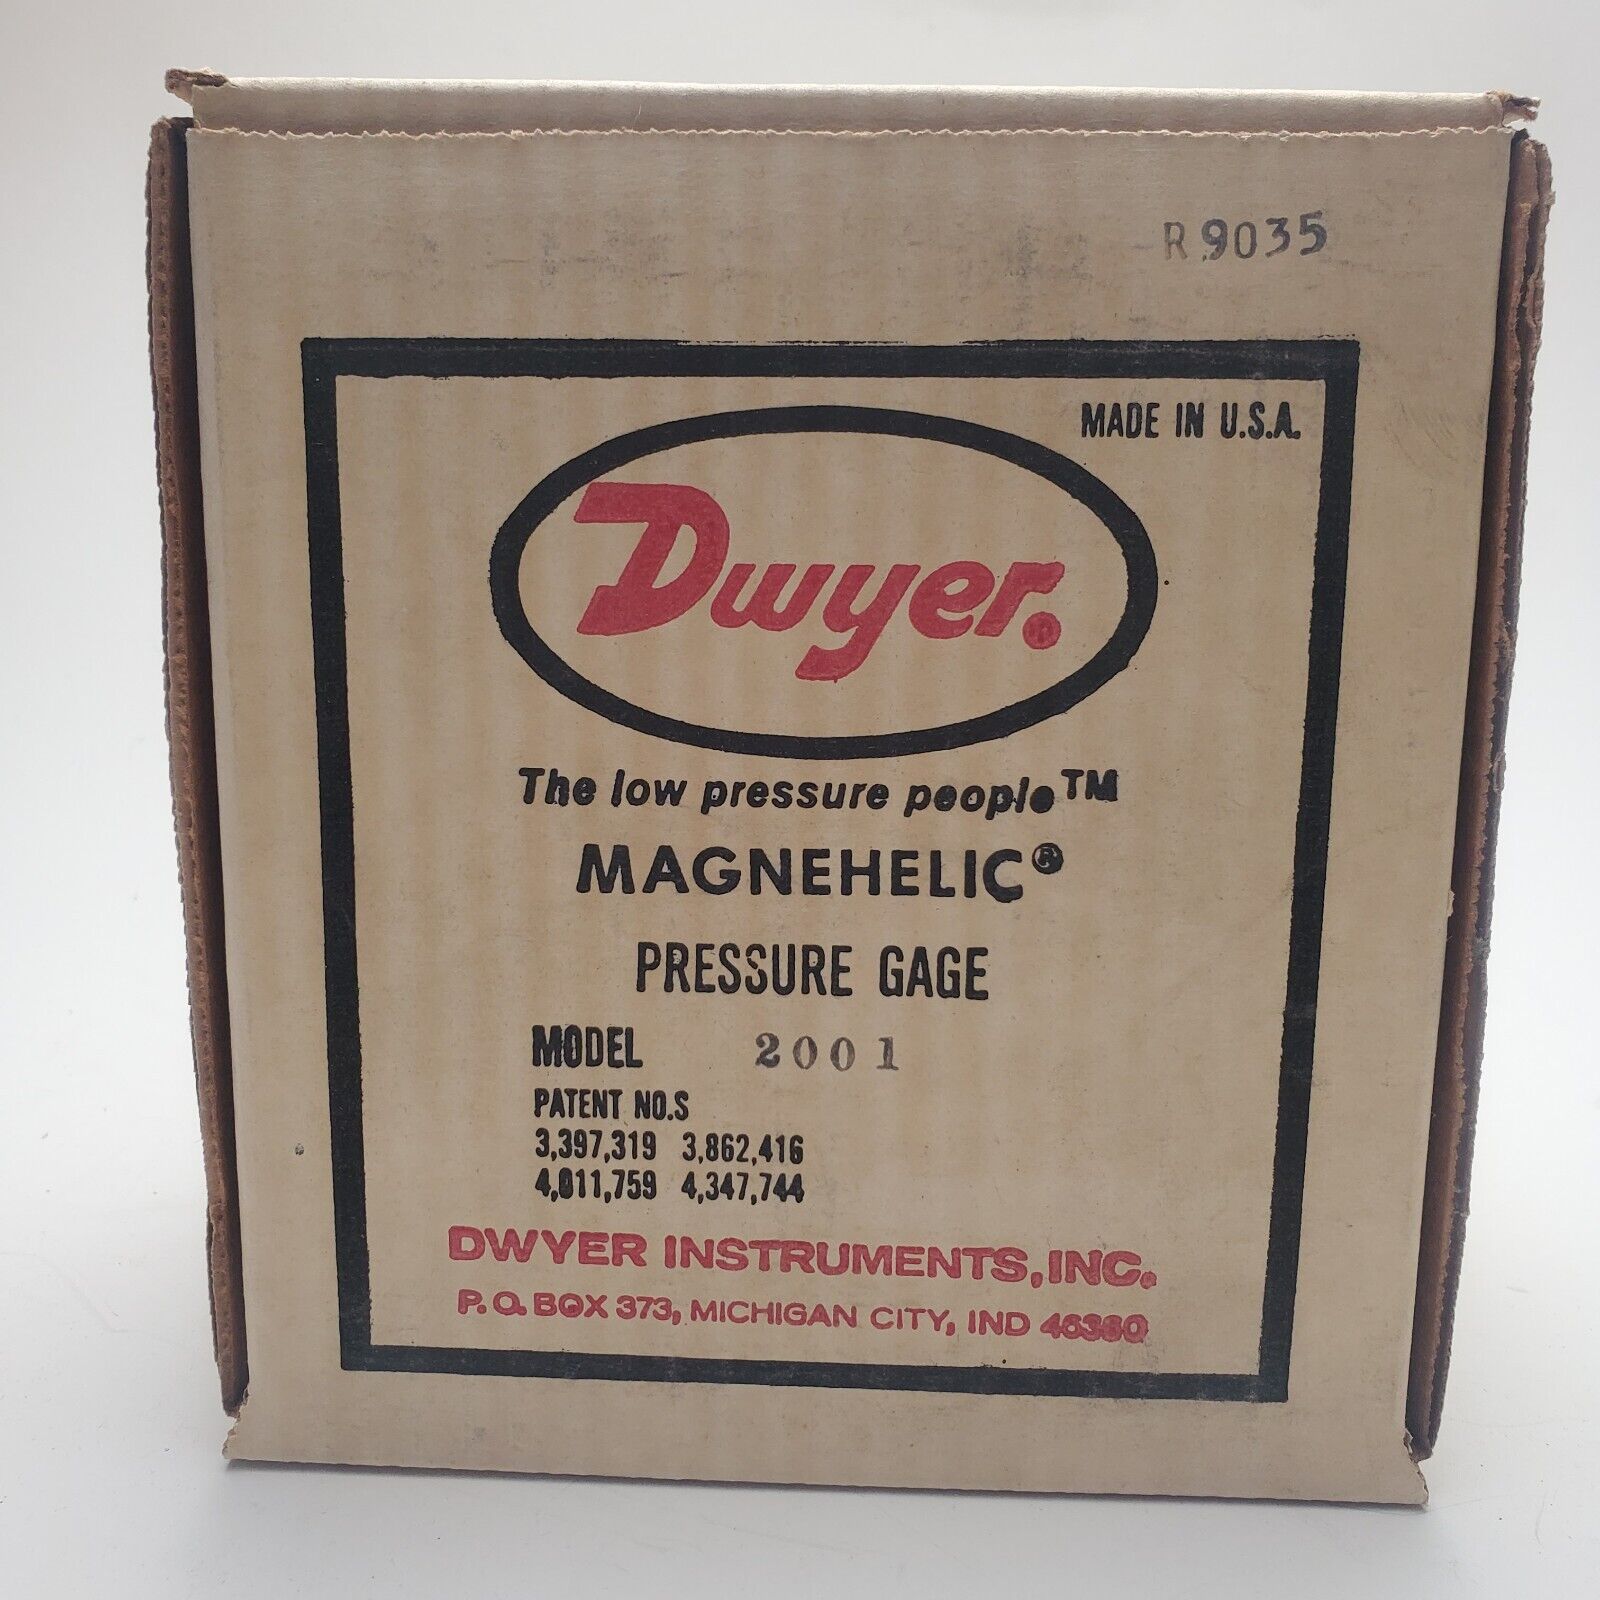 DWYER MAGNEHELIC PRESSURE GAUGE 2001 New Old Stock R9035